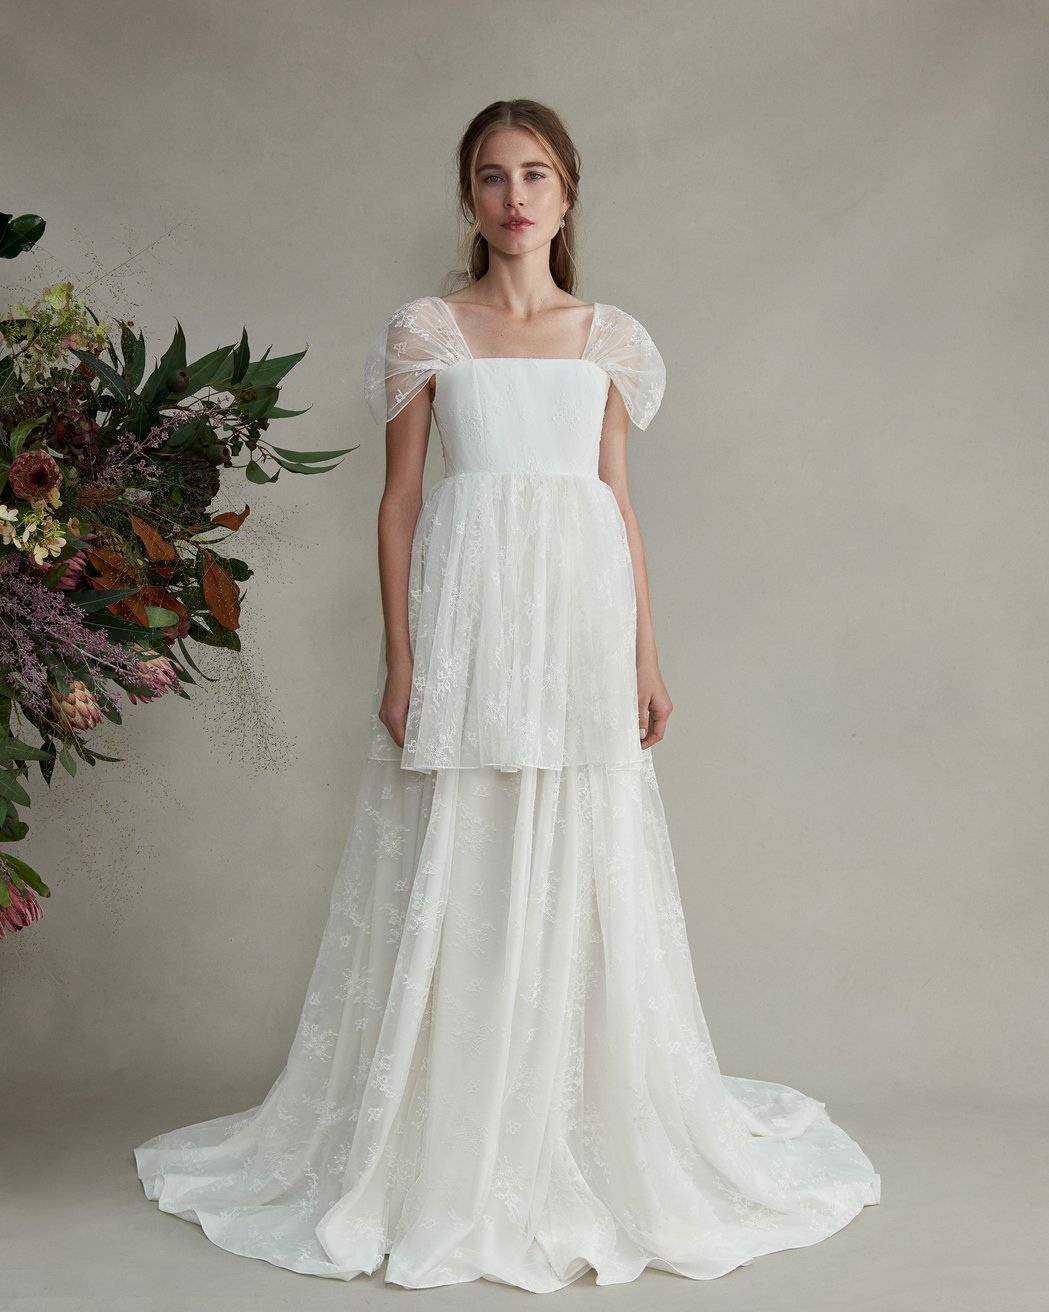 6 Cool Wedding Dress Brands for the 